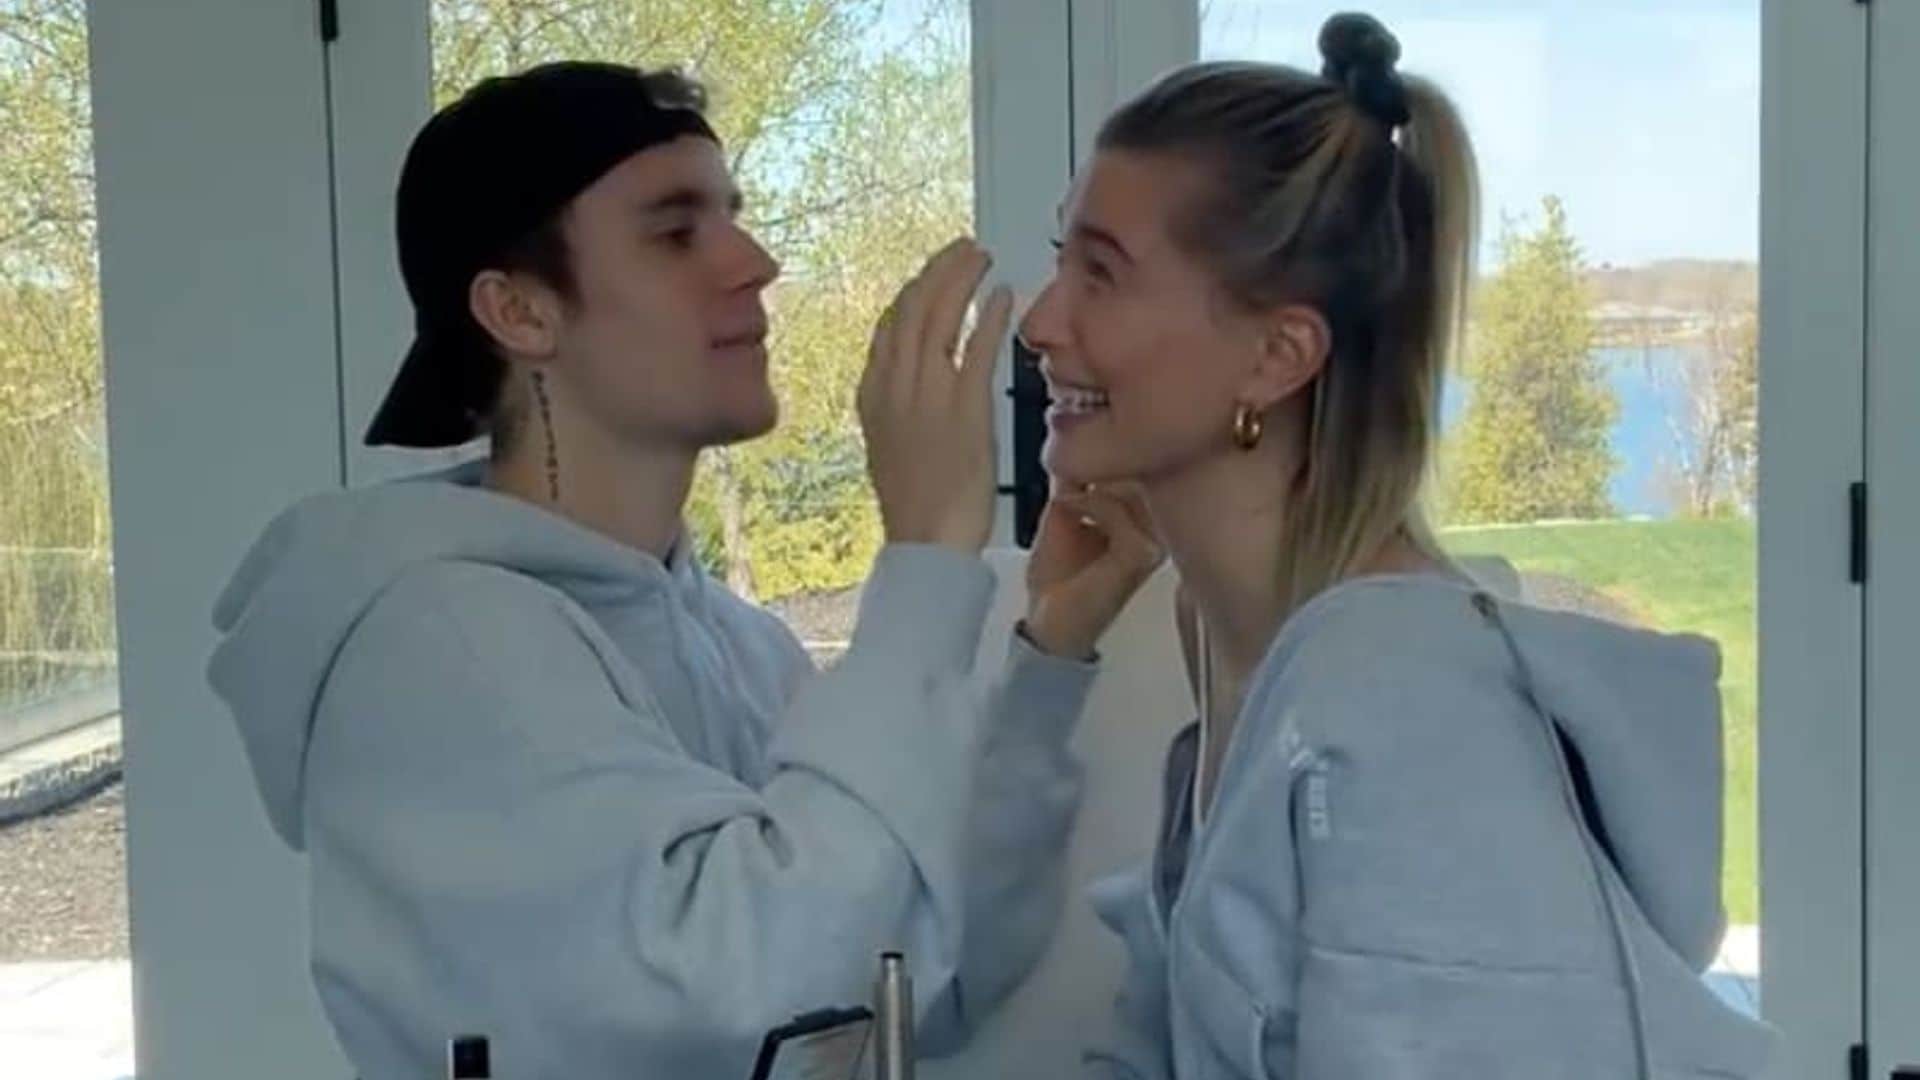 Justin Bieber does wife Hailey’s makeup and the results are impressive